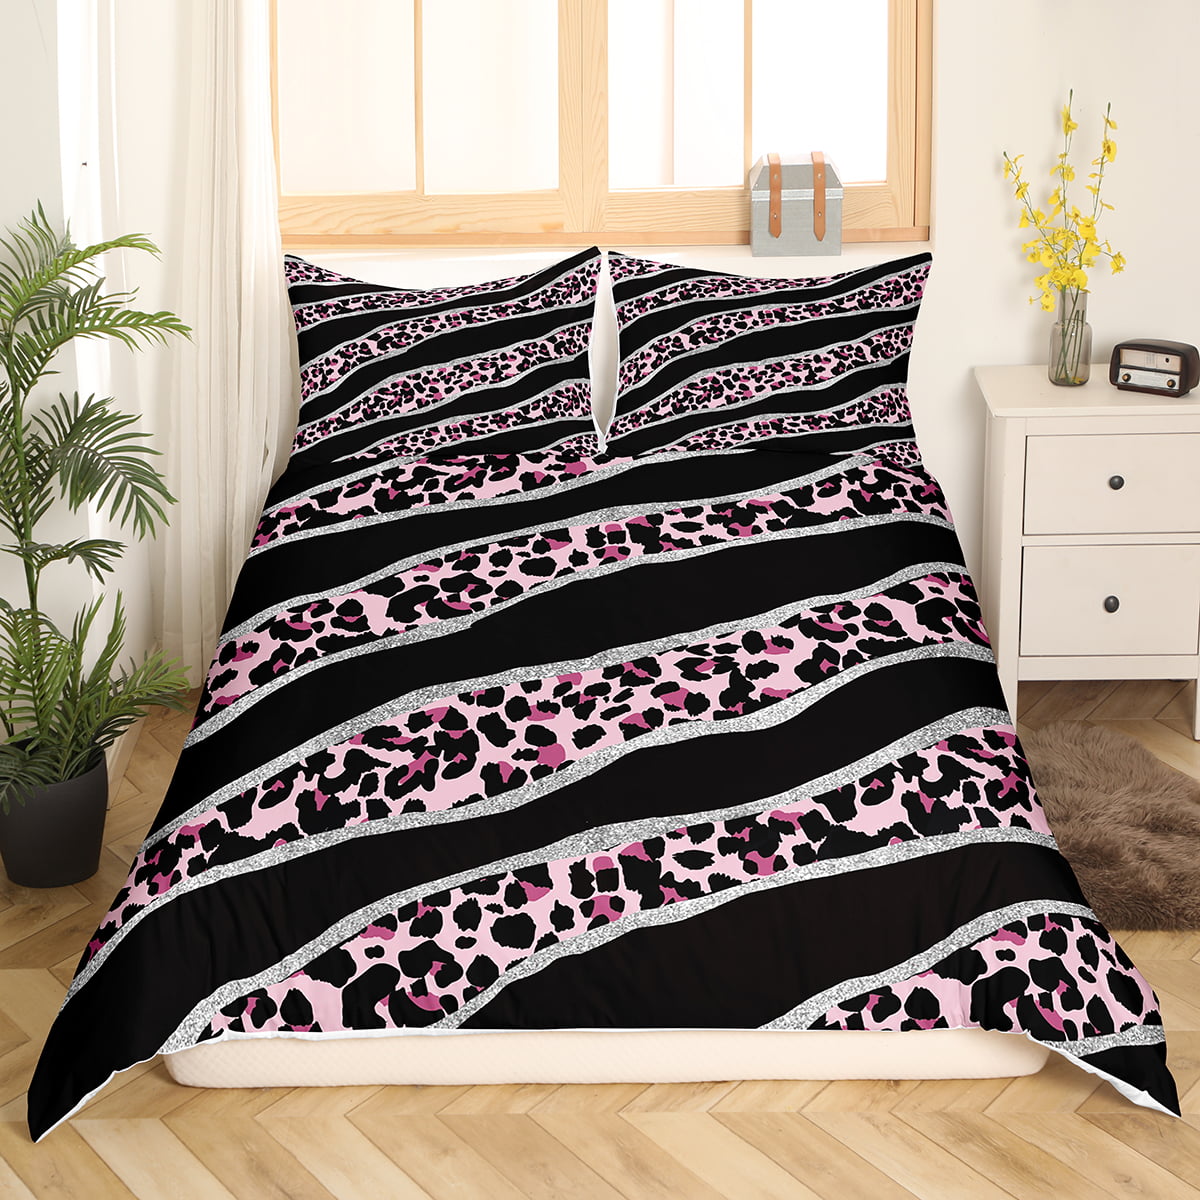 YST Cheetah Print Comforter Cover Pink Leopard Bed Sets for Kids